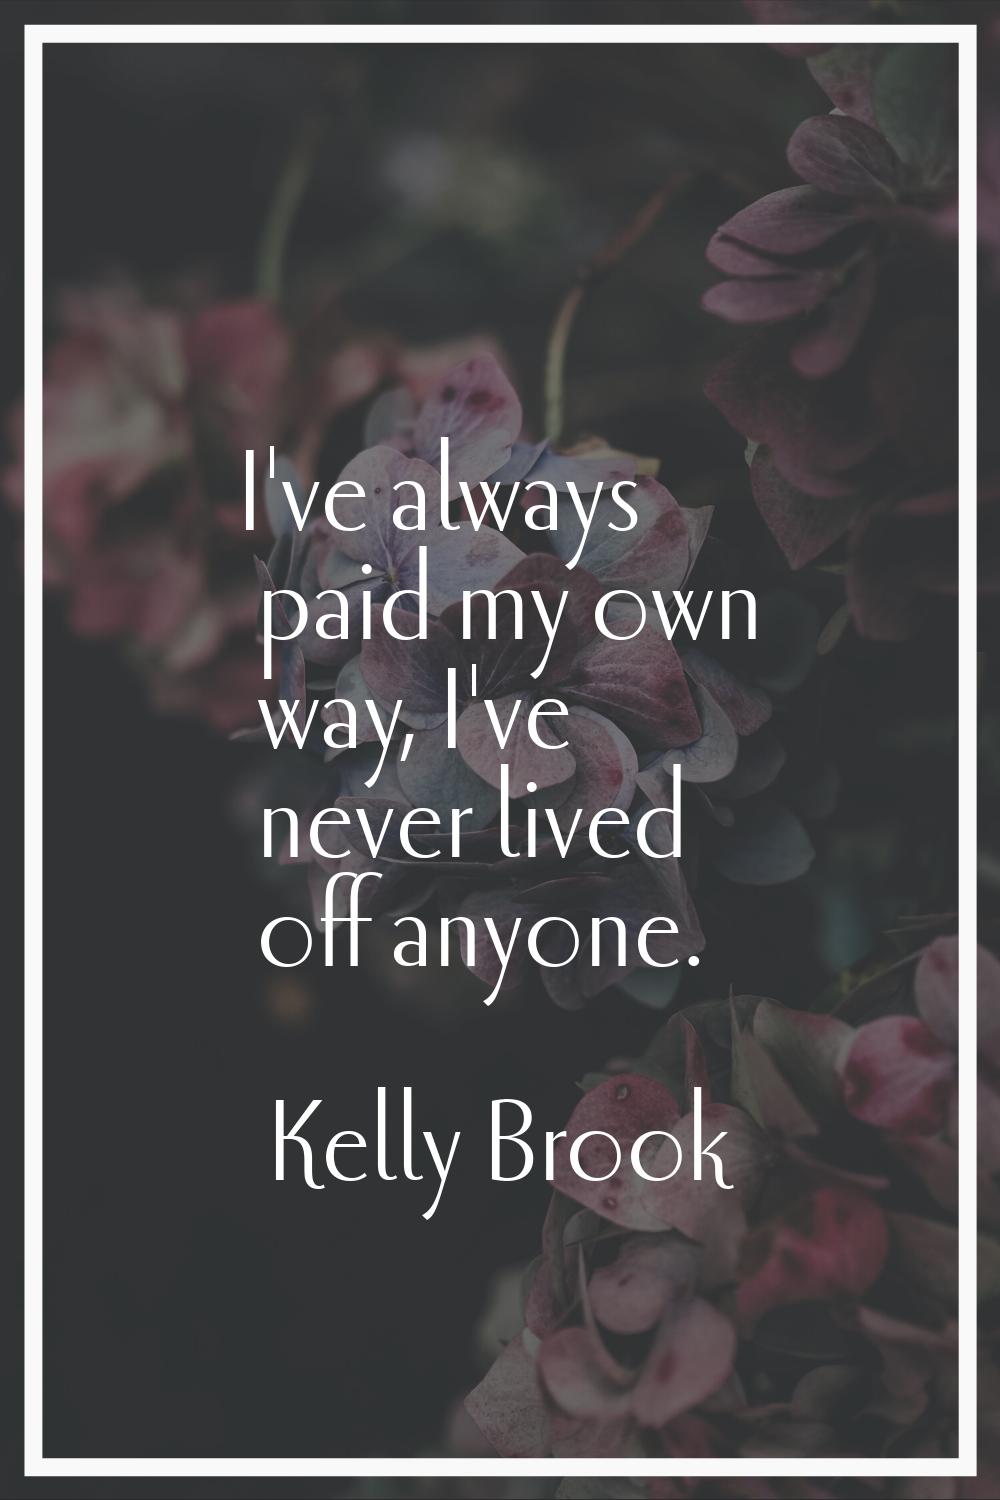 I've always paid my own way, I've never lived off anyone.